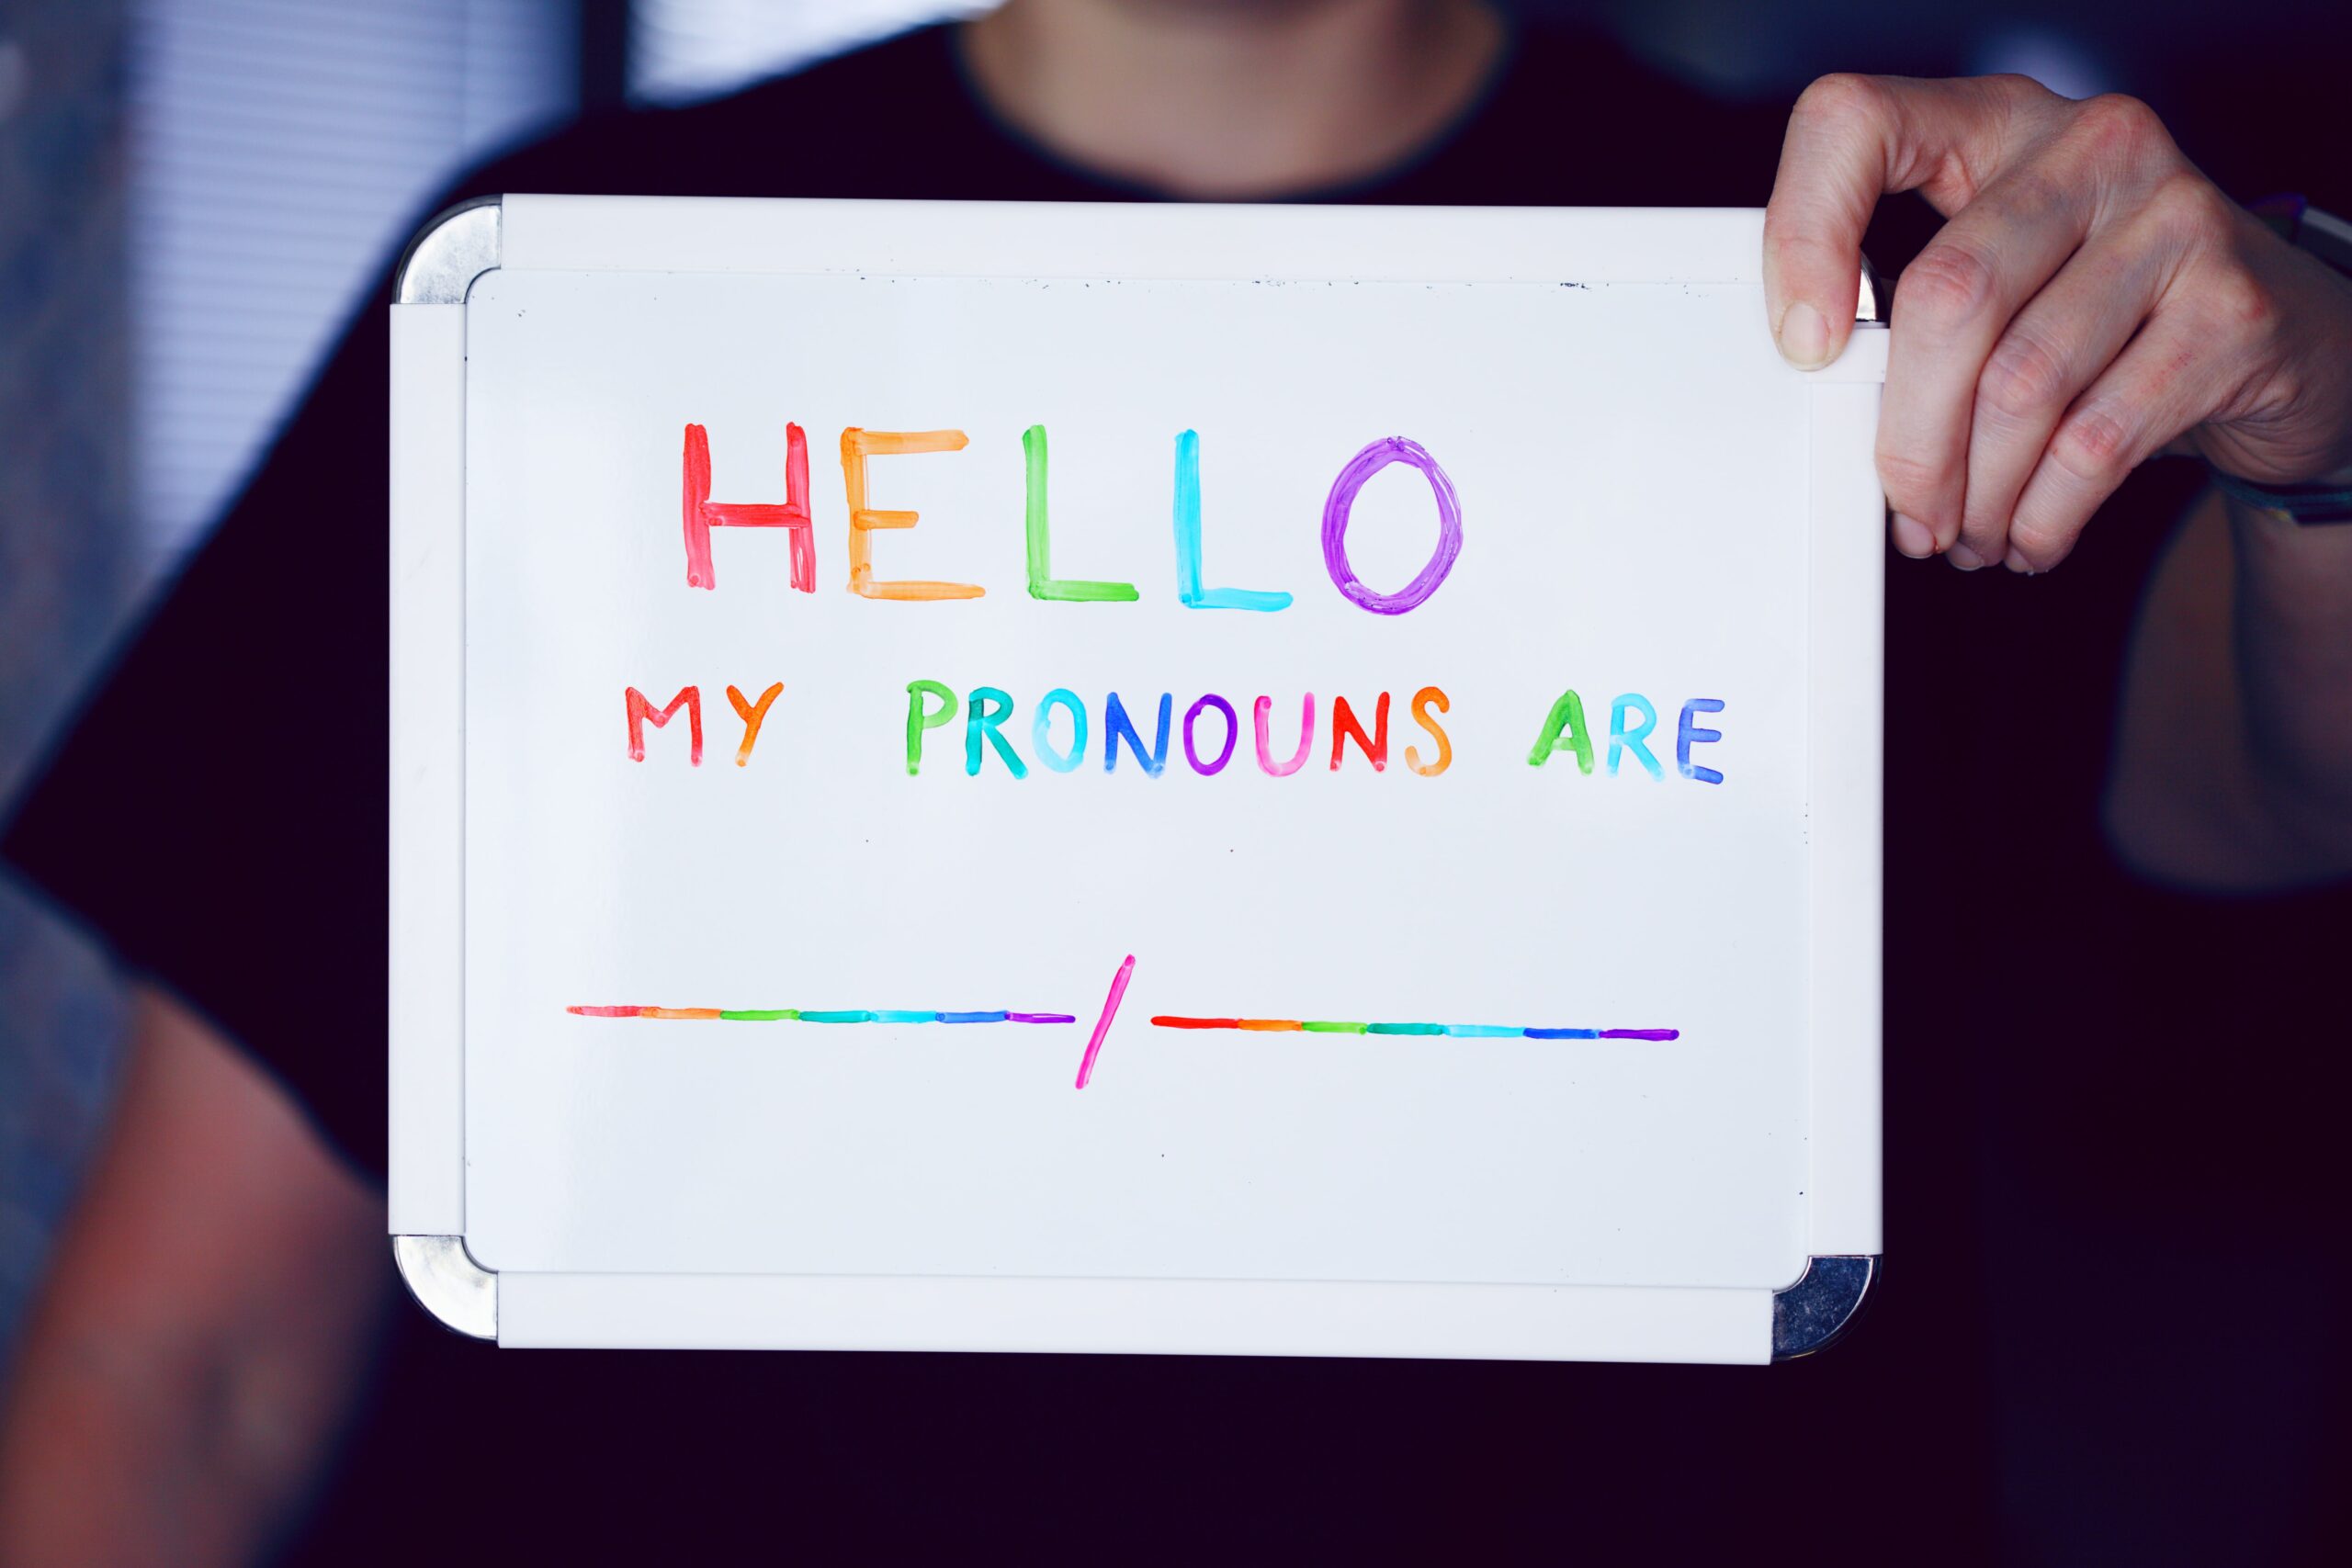 Stand Fast on the Pronouns